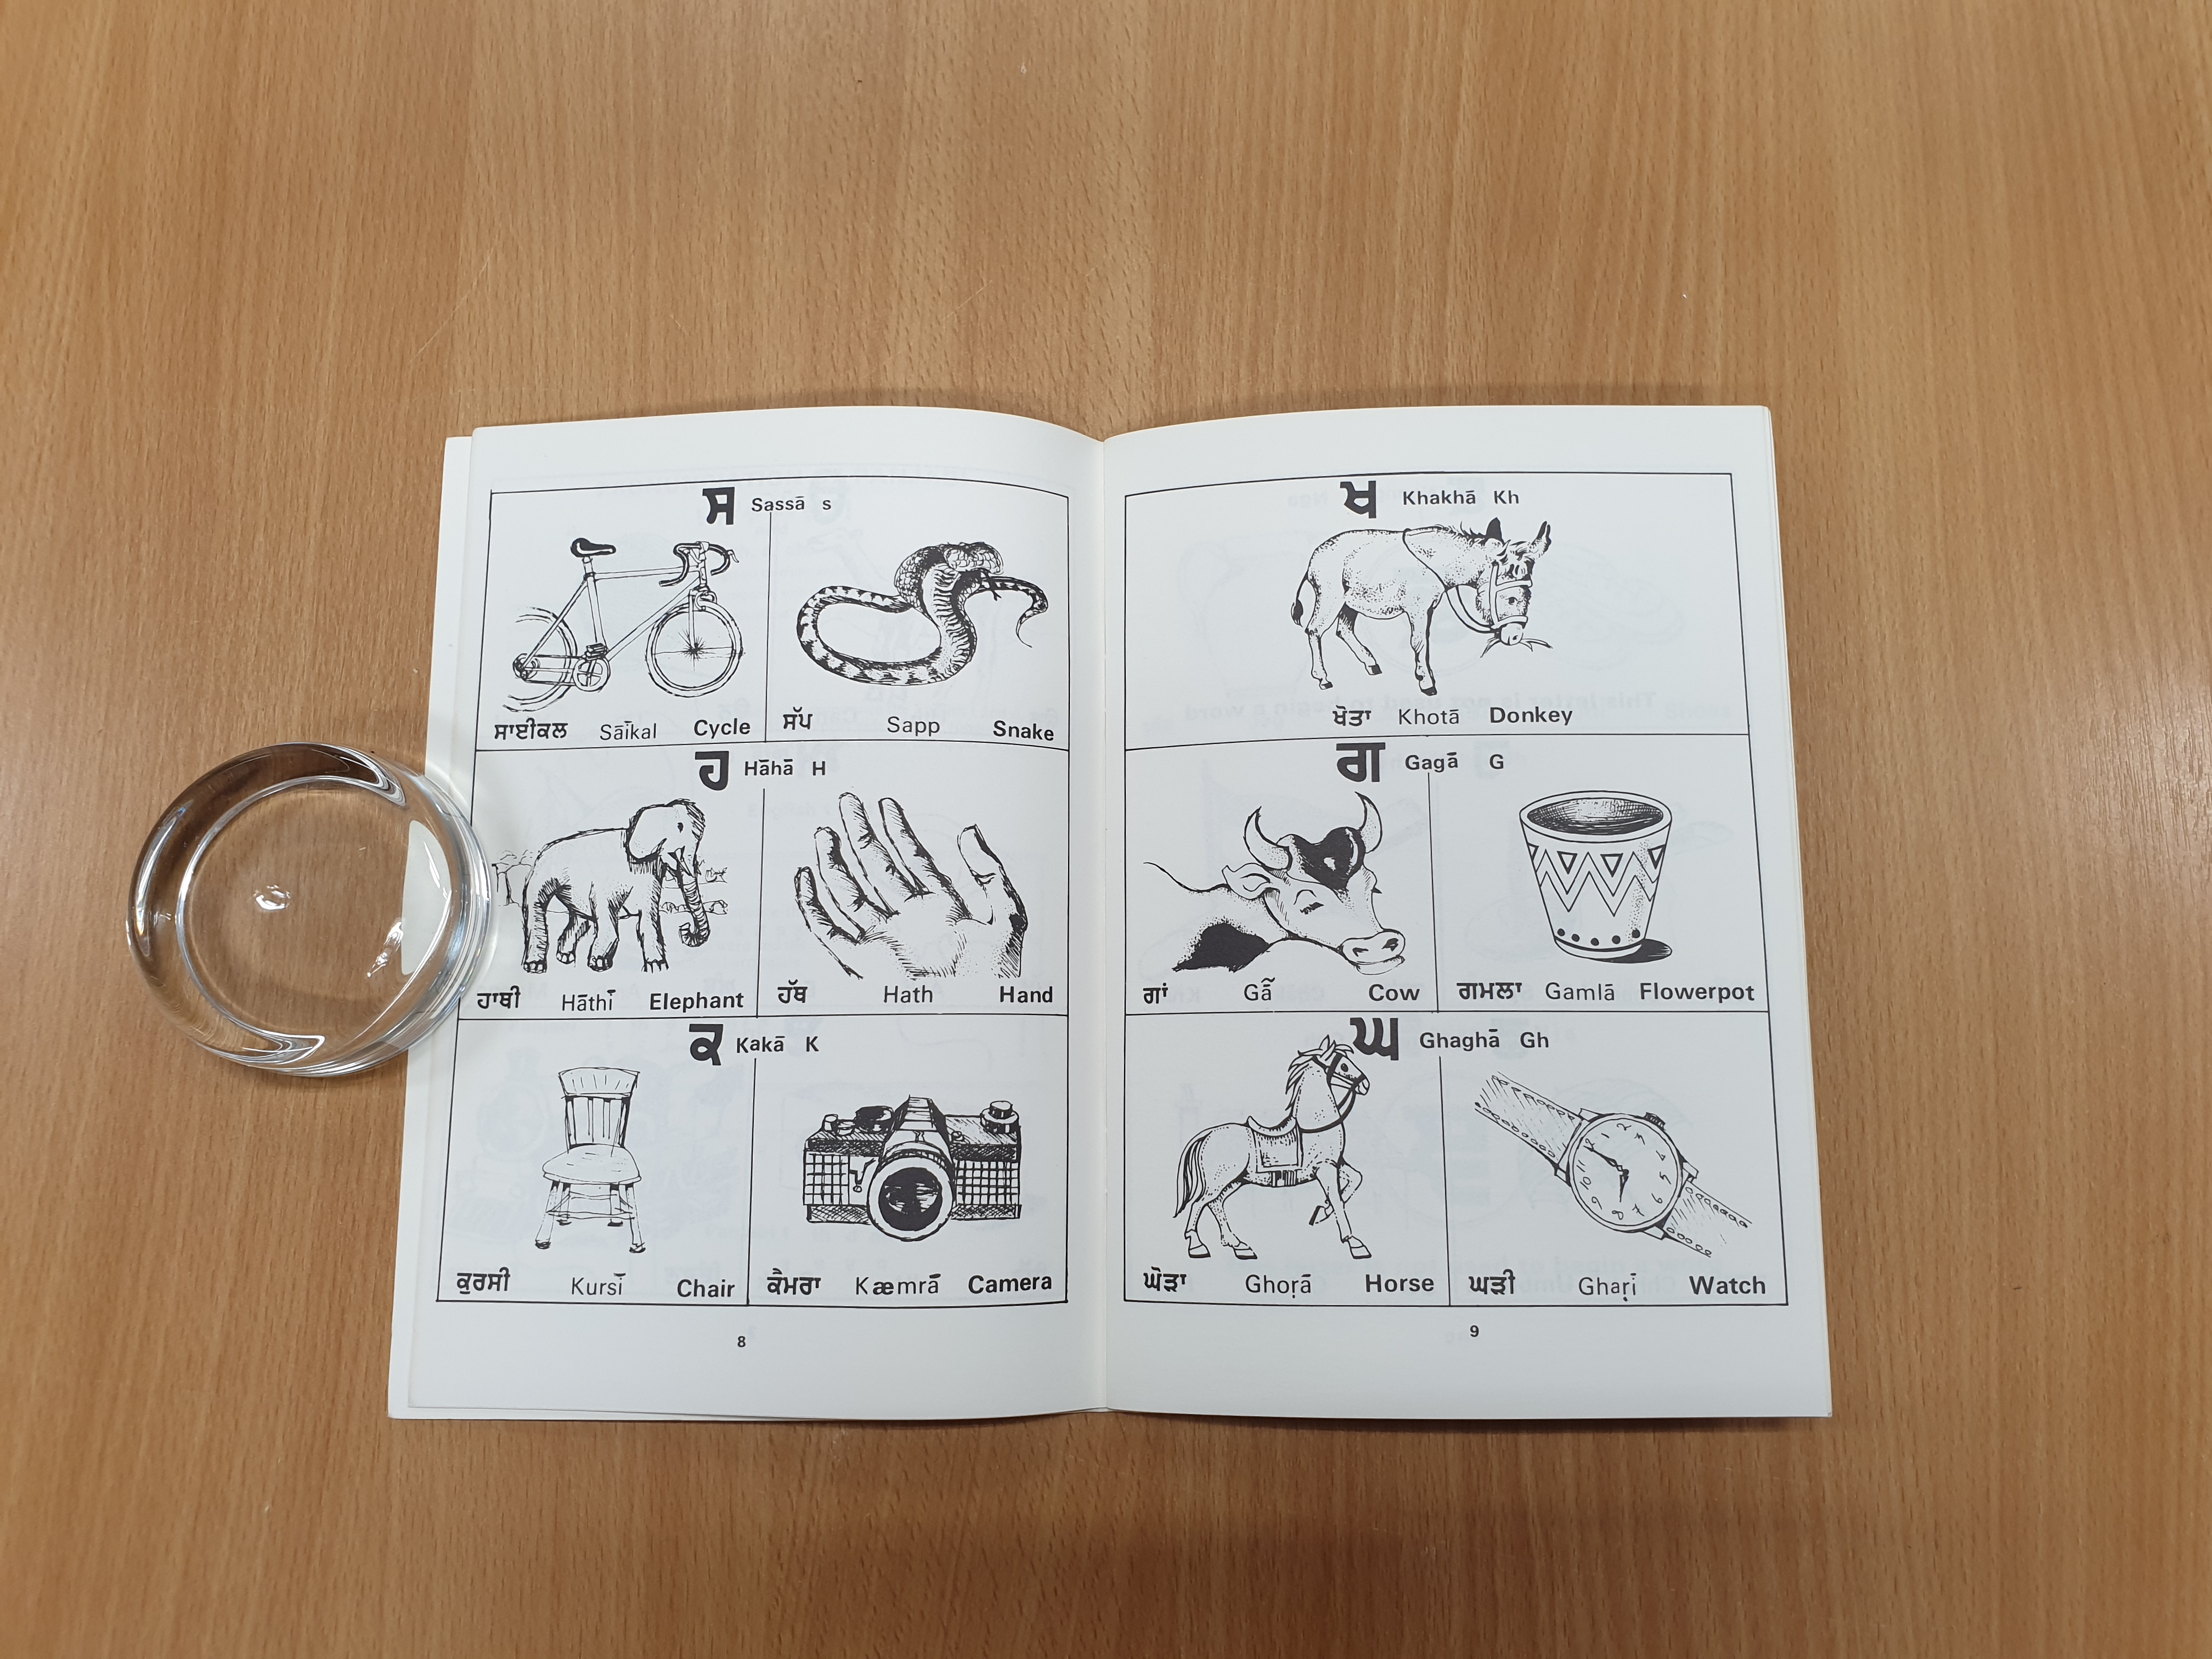 A pamphlet for learning Panjabi with pictures of different animals and objects, their names in English and Panjabi and pronunciation guides. Featured words and images include: bicycle, snake, elephant, hand, chair, camera,  donkey, cow, flowerpot, horse and watch.